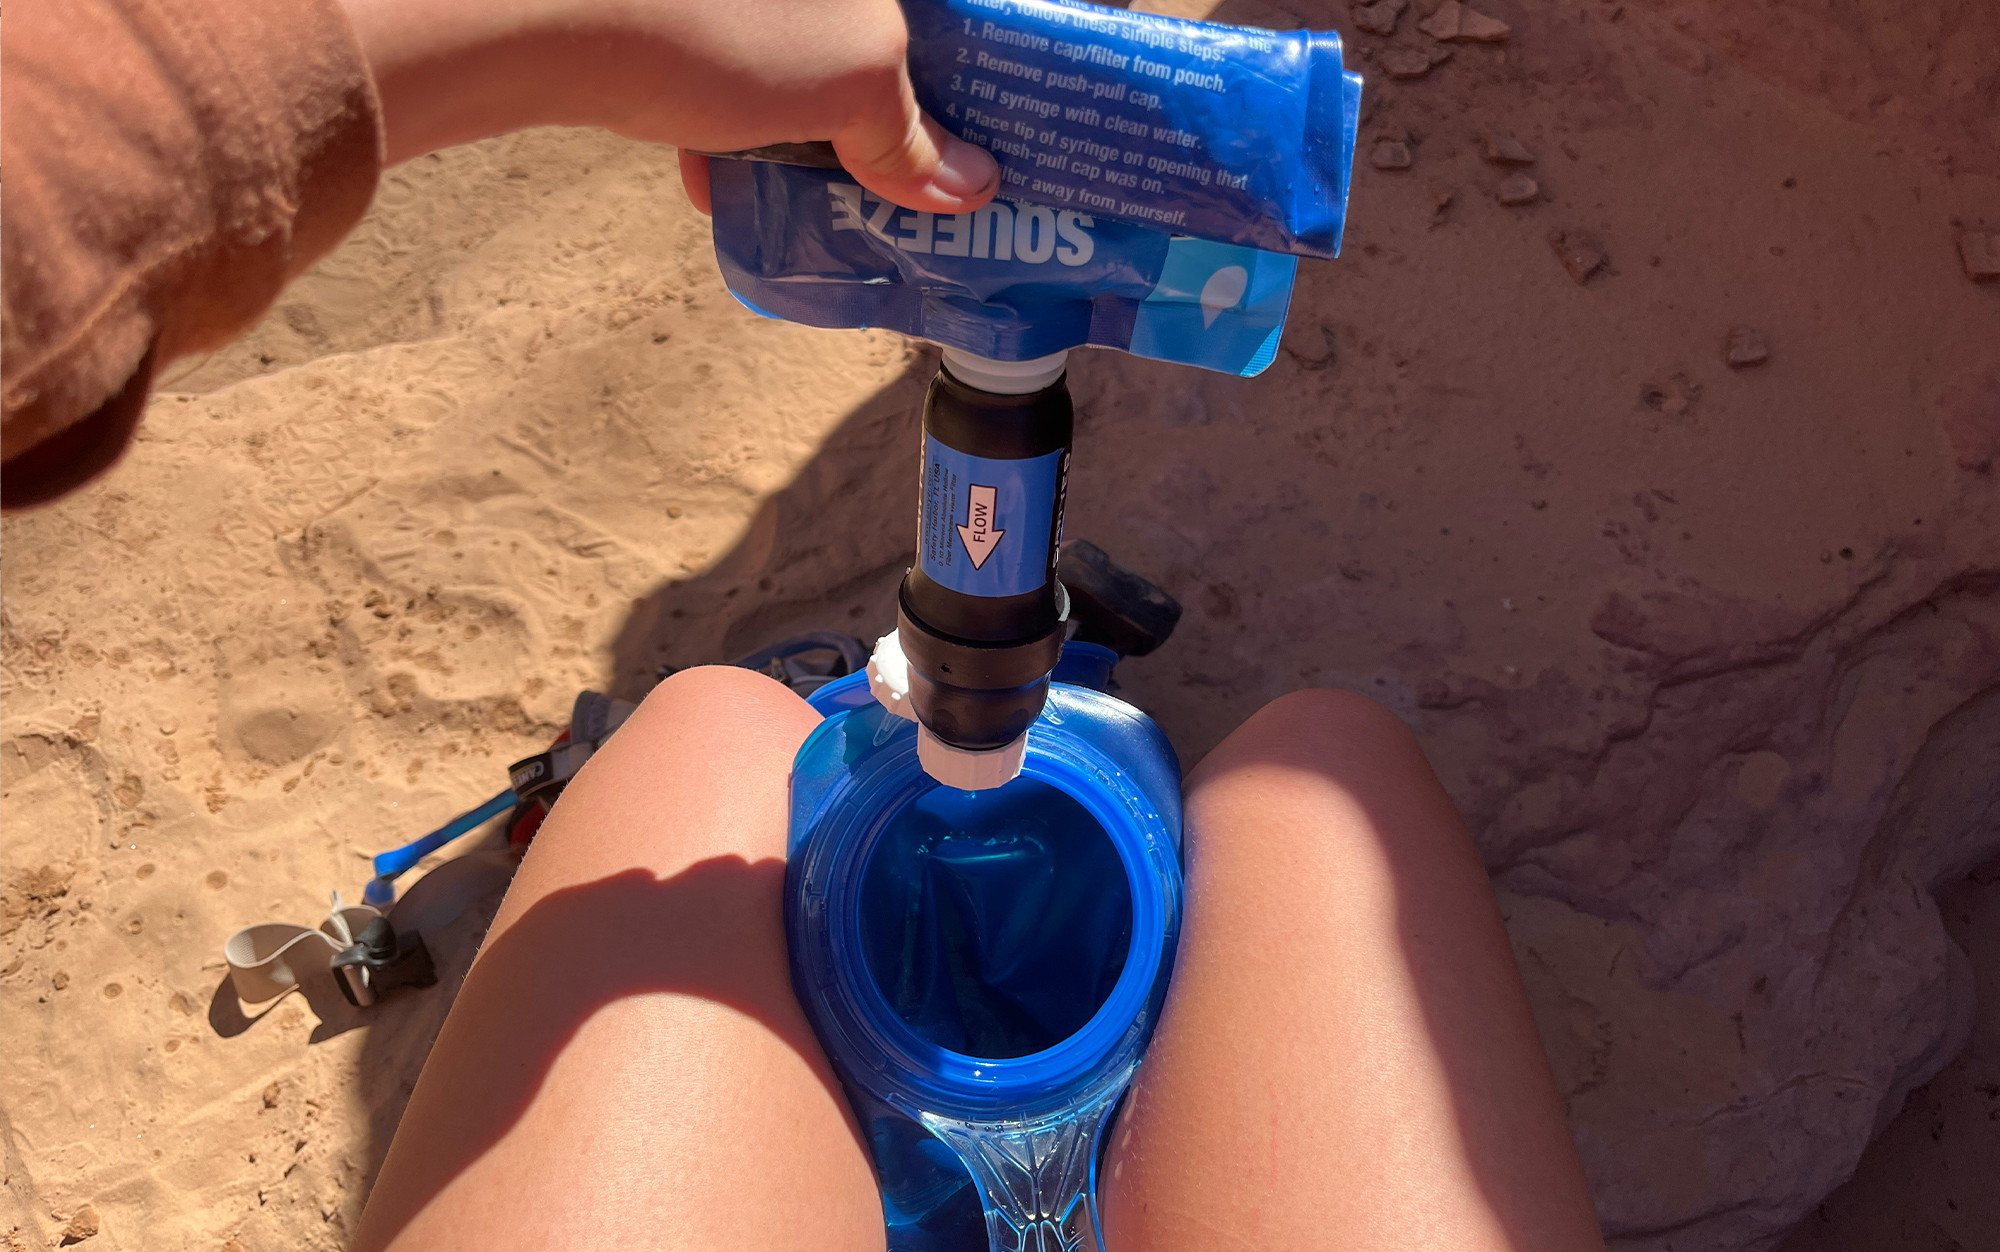 Regardless if you decide to attach a filter to your hose or filter clean water directly into your reservoir, the best hydration bladders are great options for backpacking.